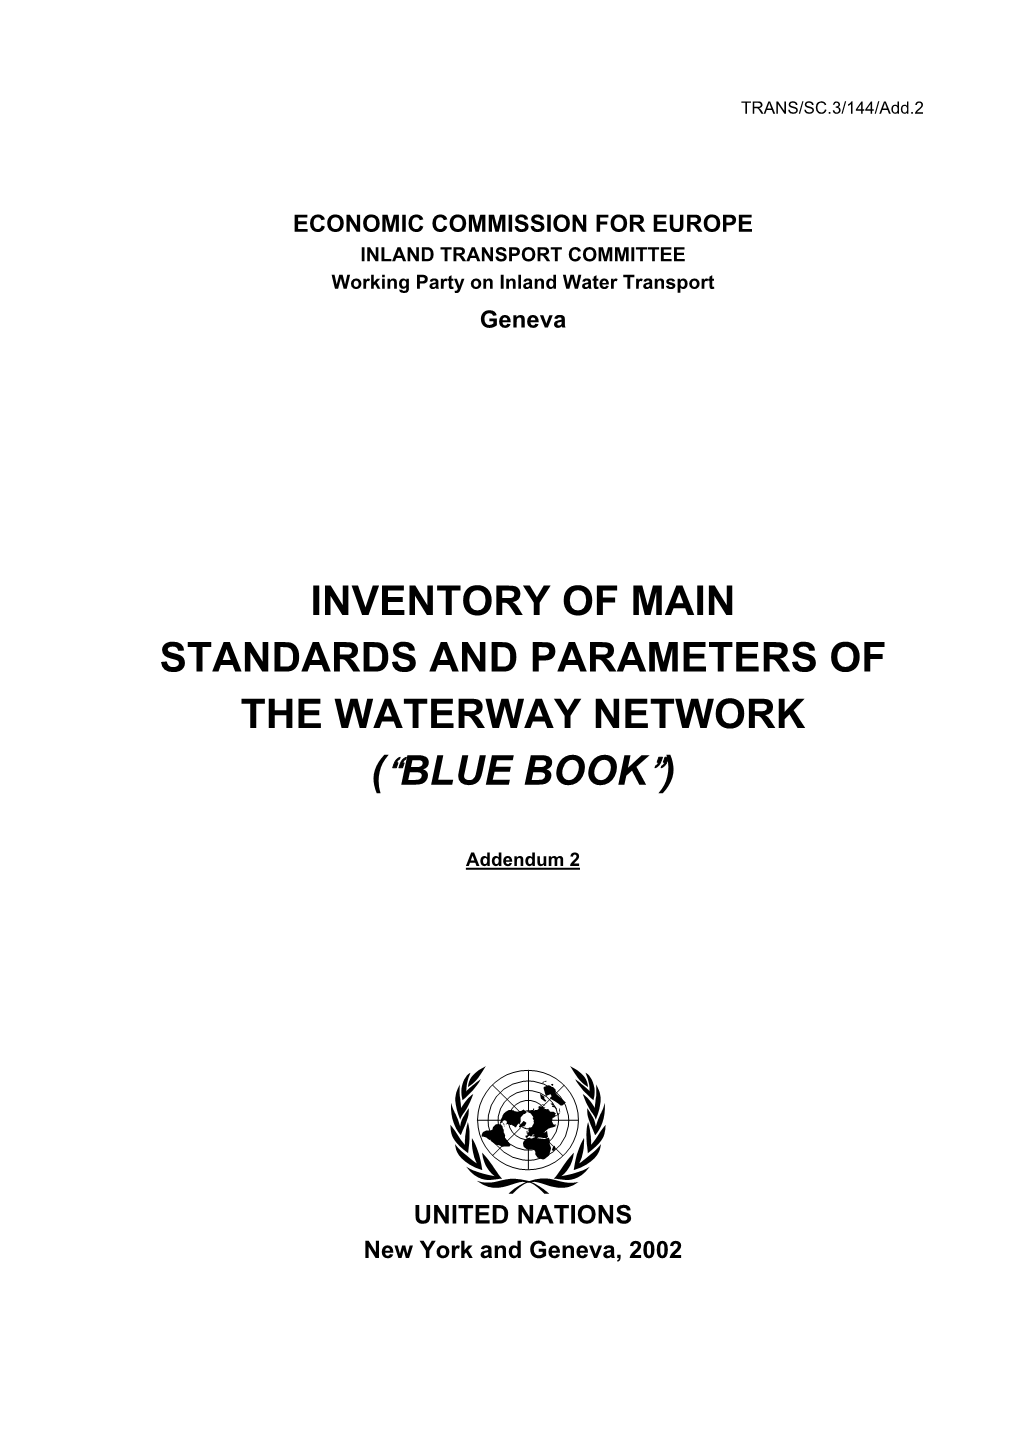 Inventory of Main Standards and Parameters of the Waterway Network (Ablue Book@)